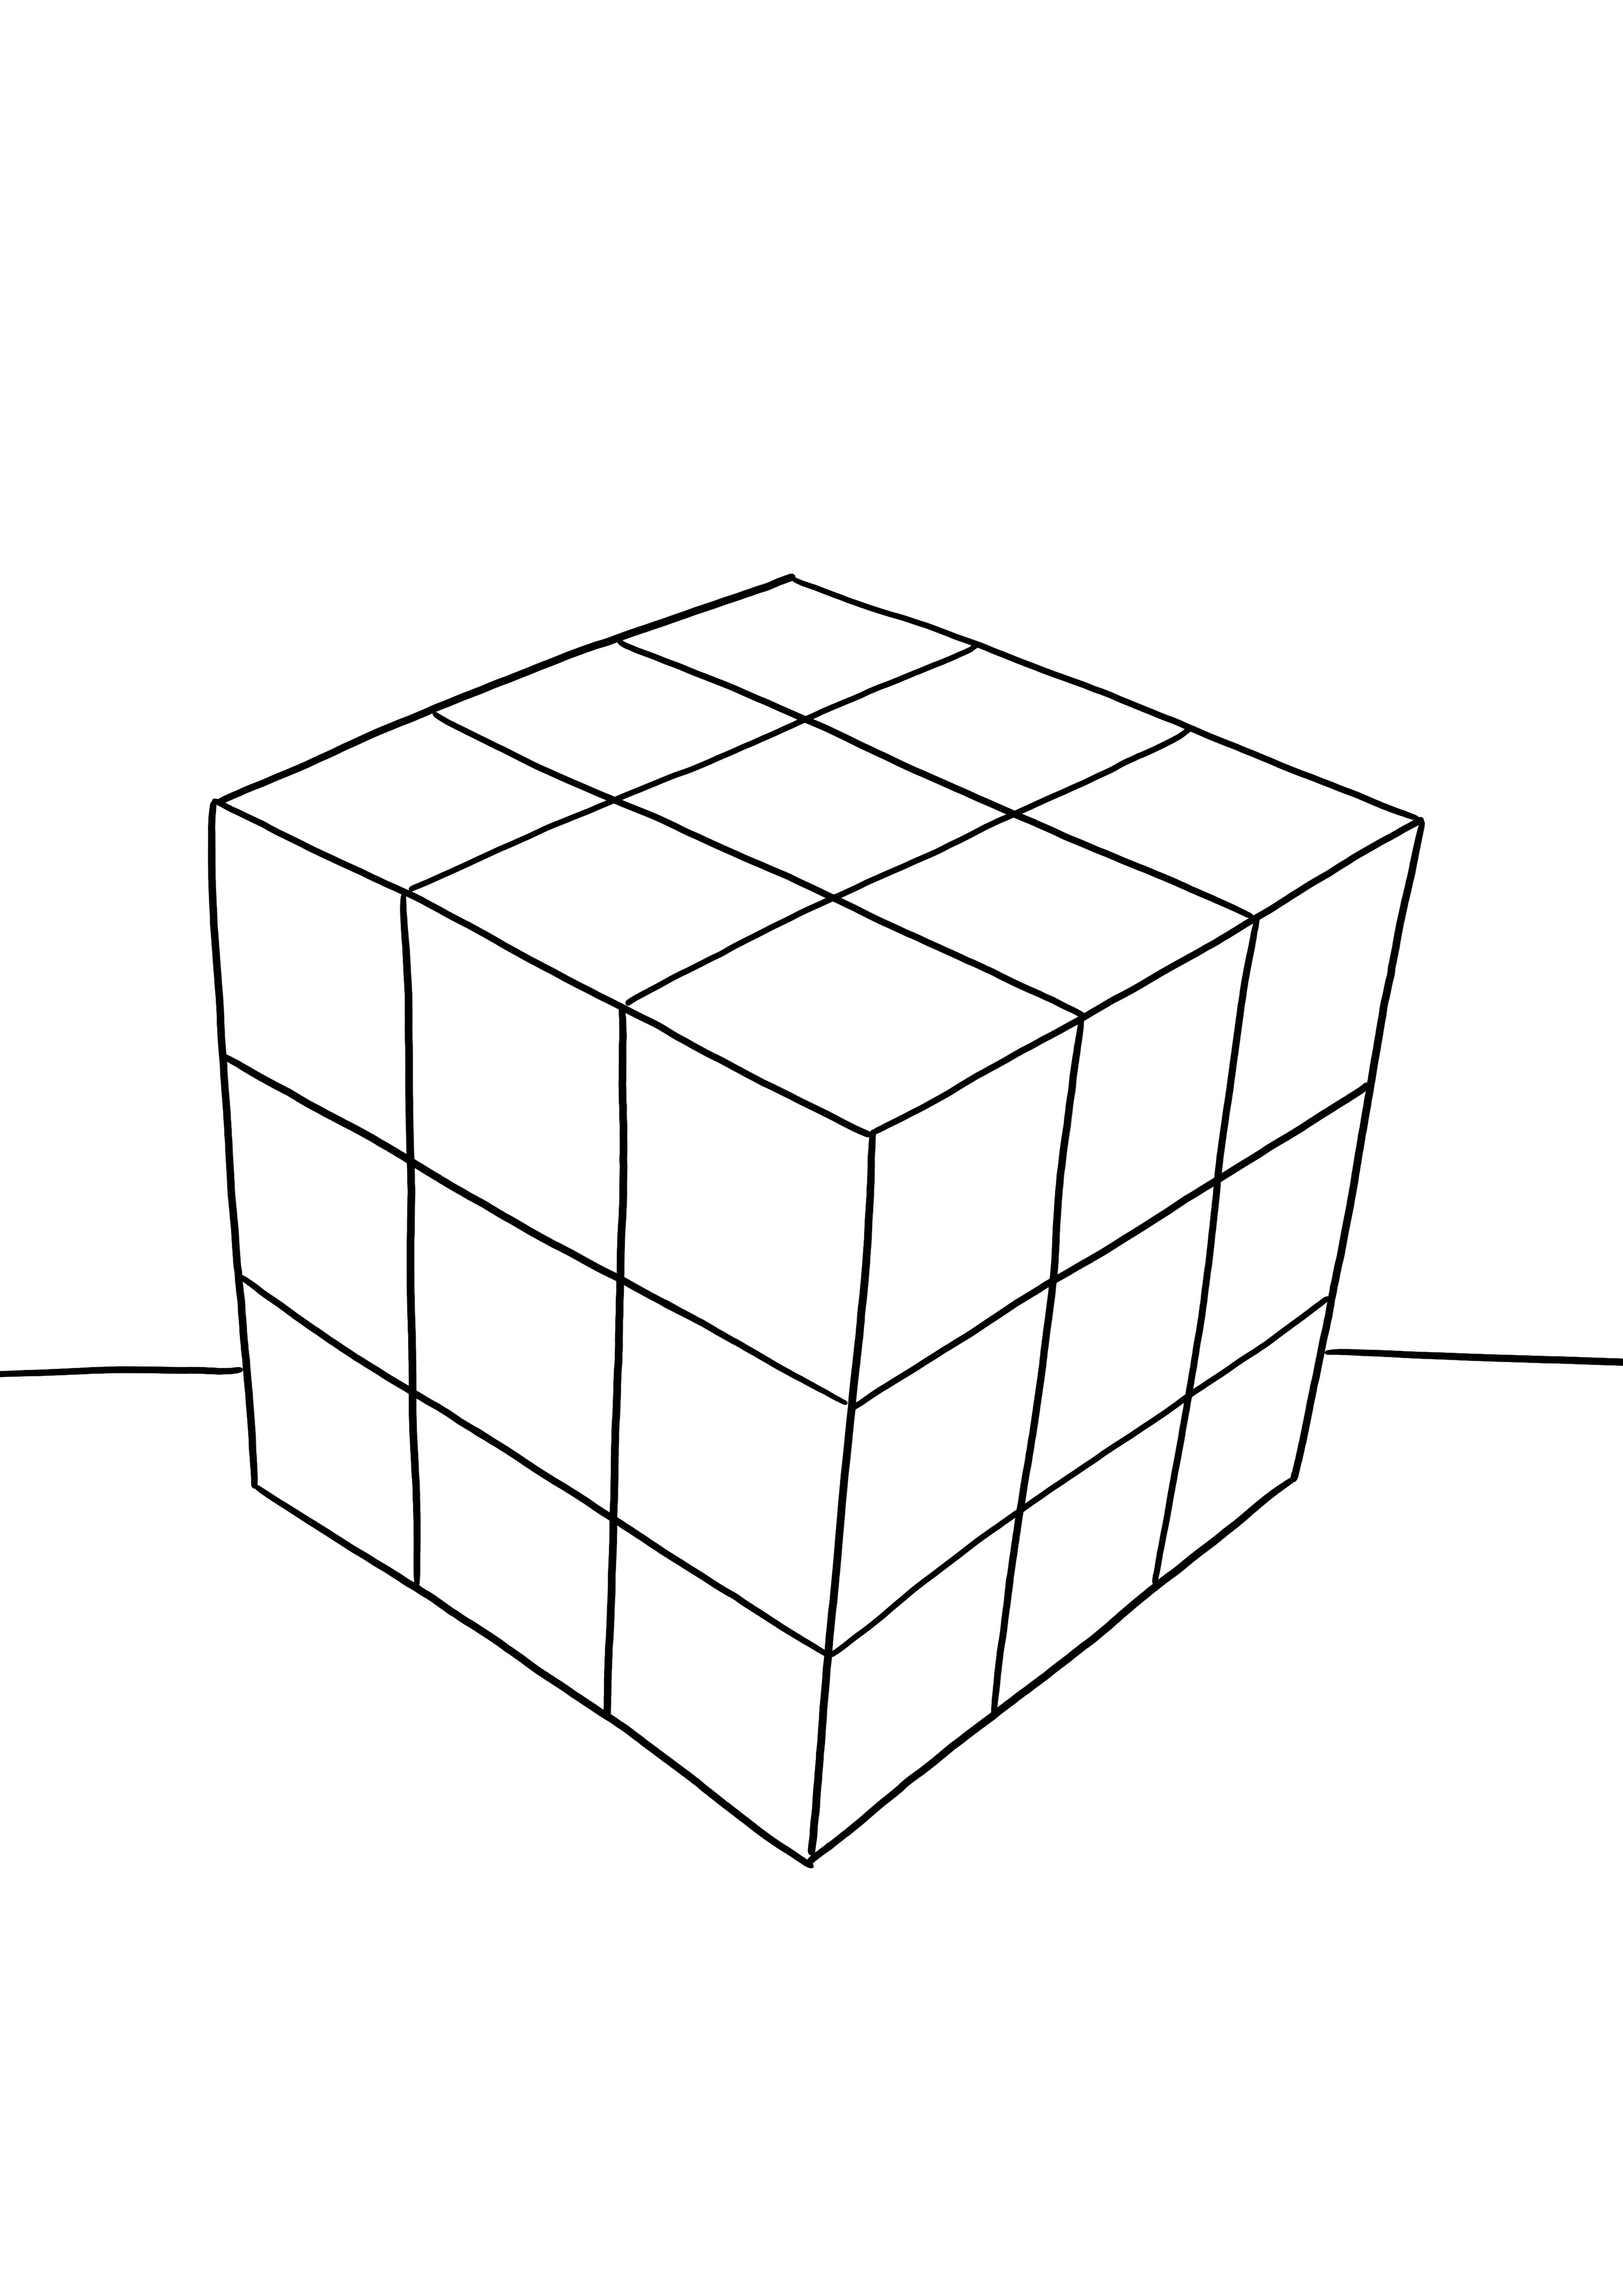 Free to print and color of Rubik's Cube for kids to learn about toys